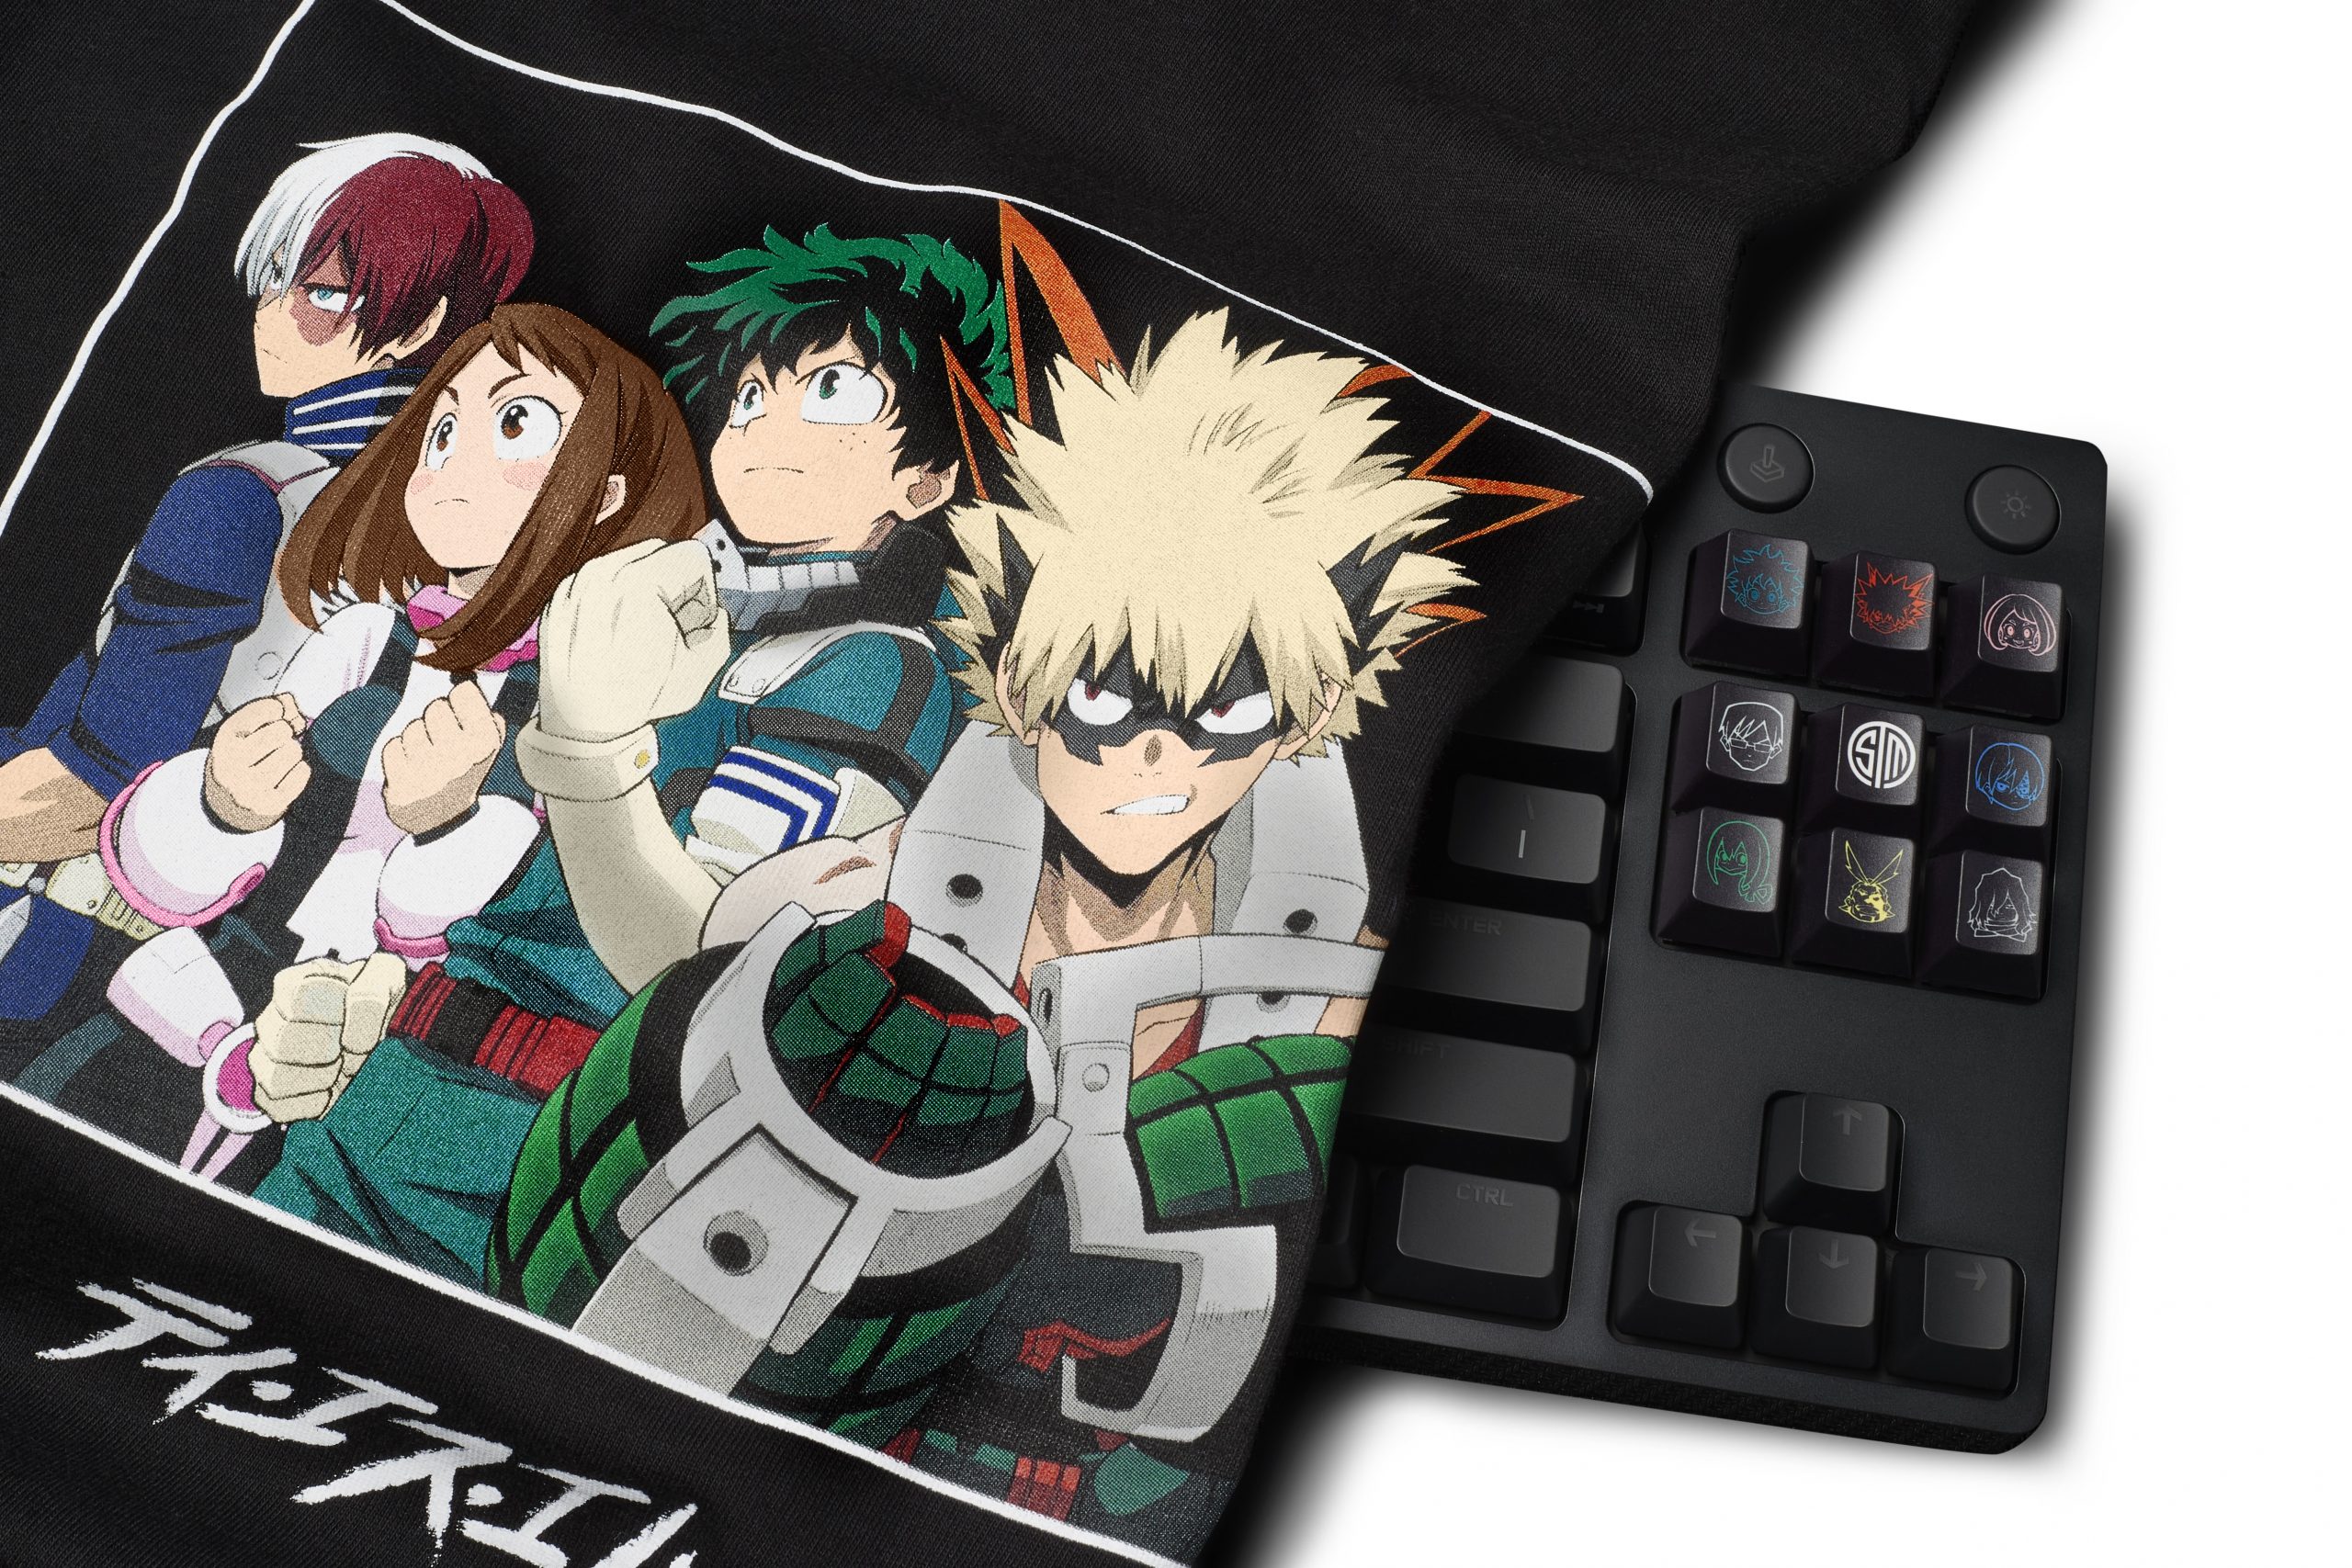 My Hero Academia Clothes and Gaming Accessories Coming This Month